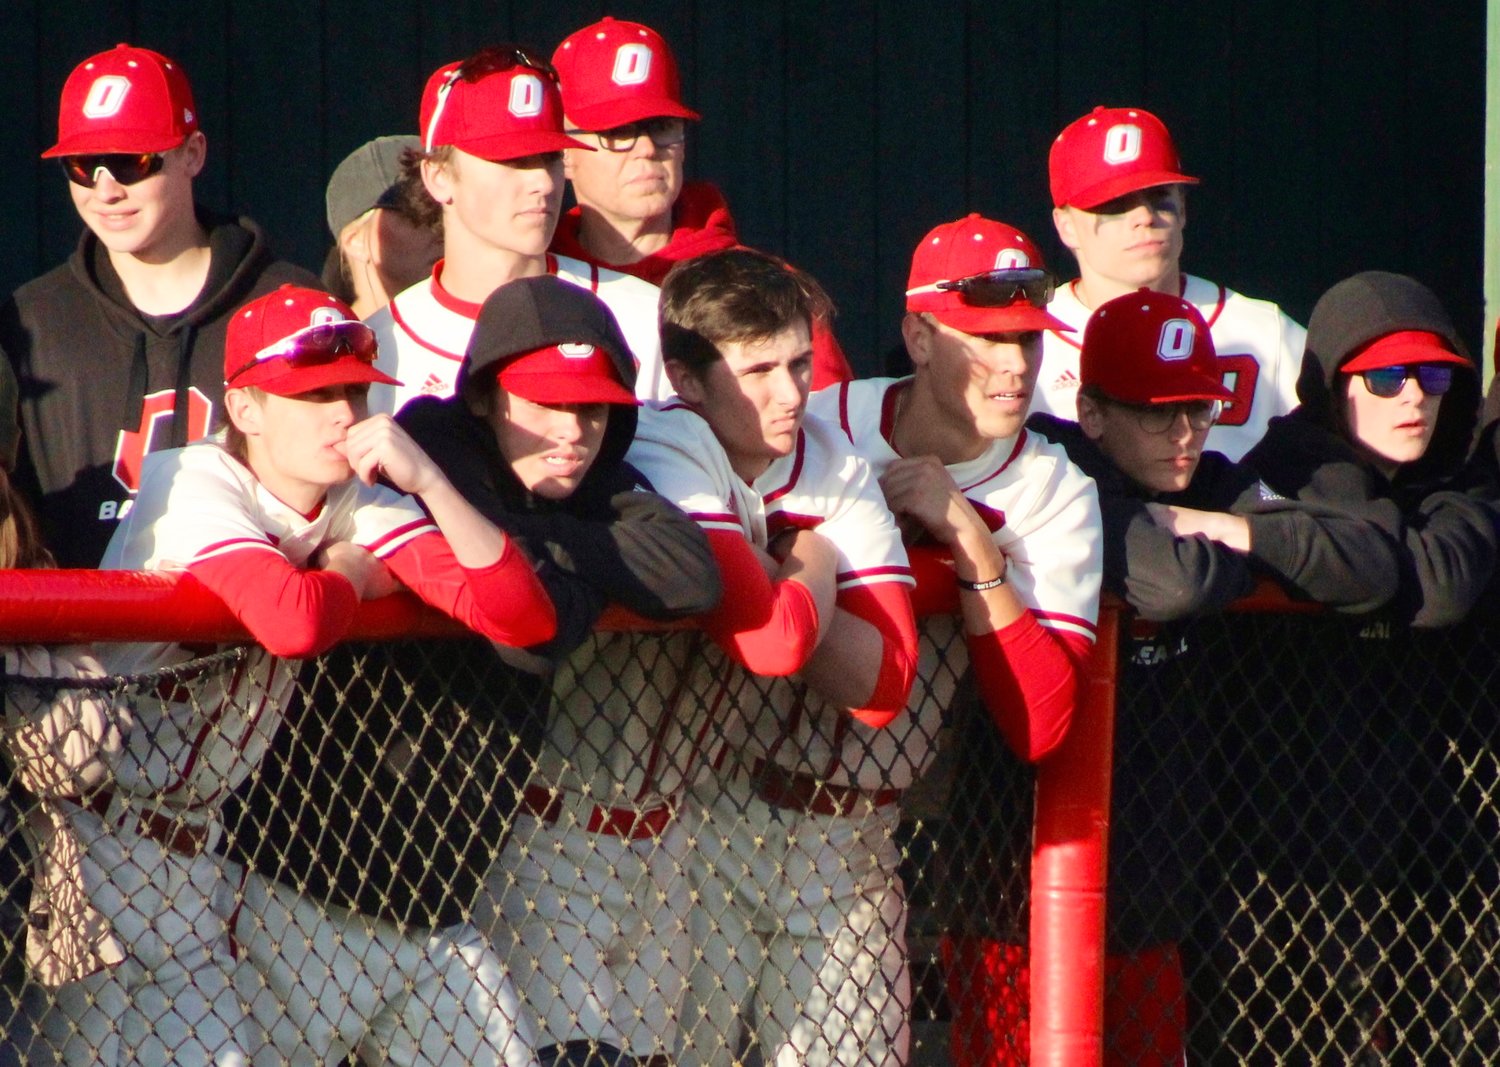 OZARK PLAYERS watch the action from their dugout.